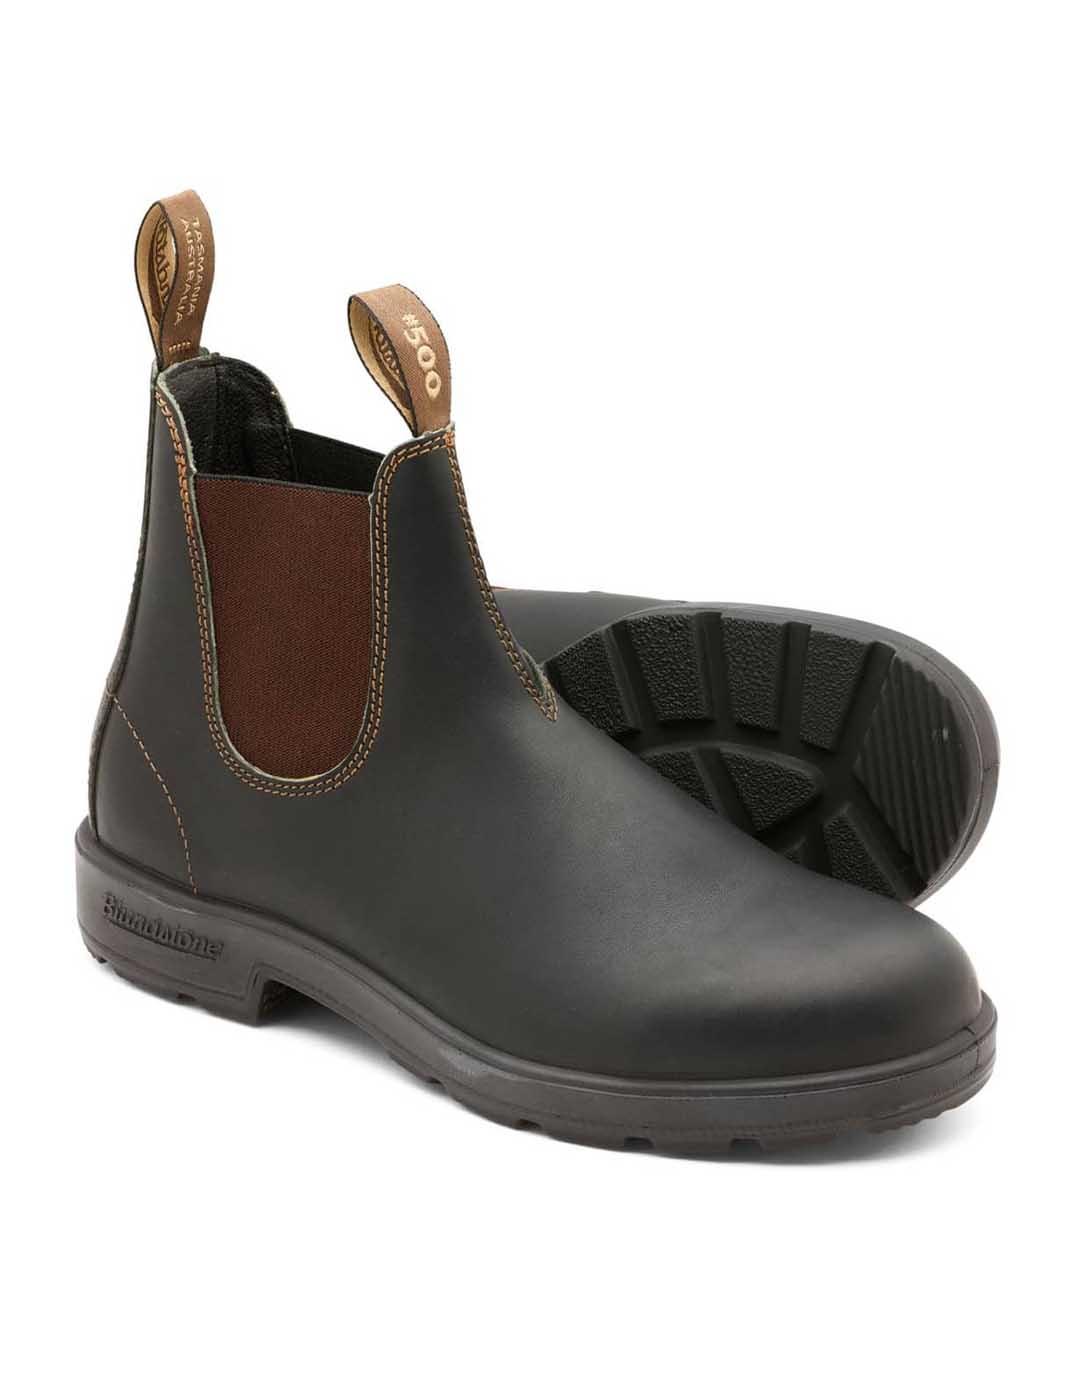 BLUNDSTONE 500 CHELSEA BOOTS STOUT BROWN  LEATHER